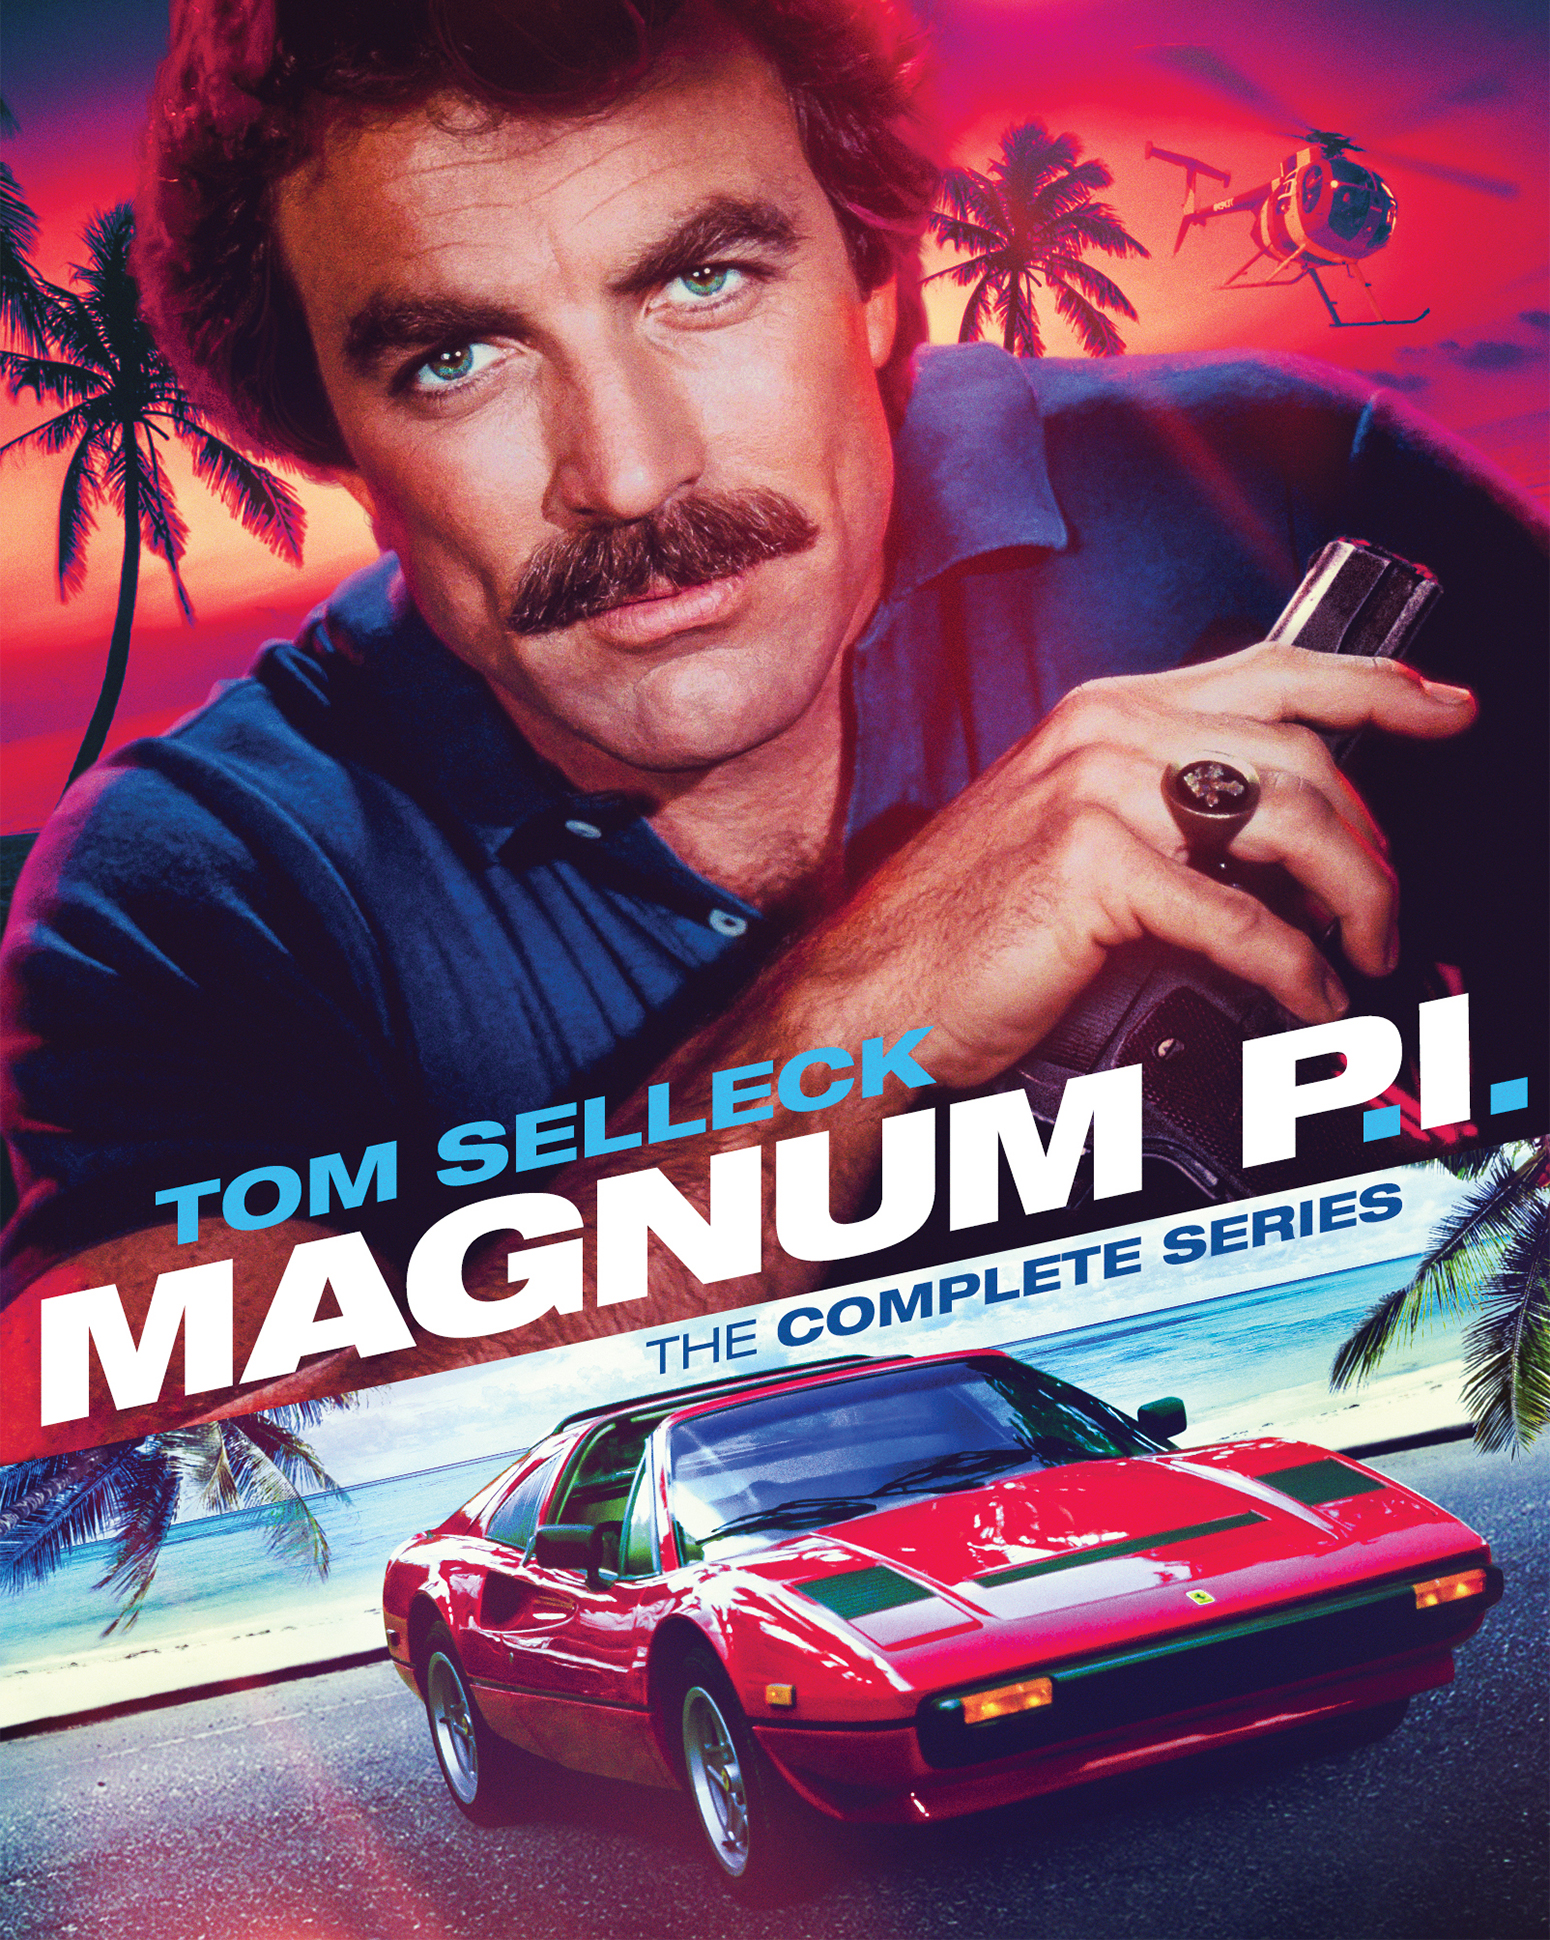 Magnum P.I.: The Complete Series [Blu-ray] - Best Buy